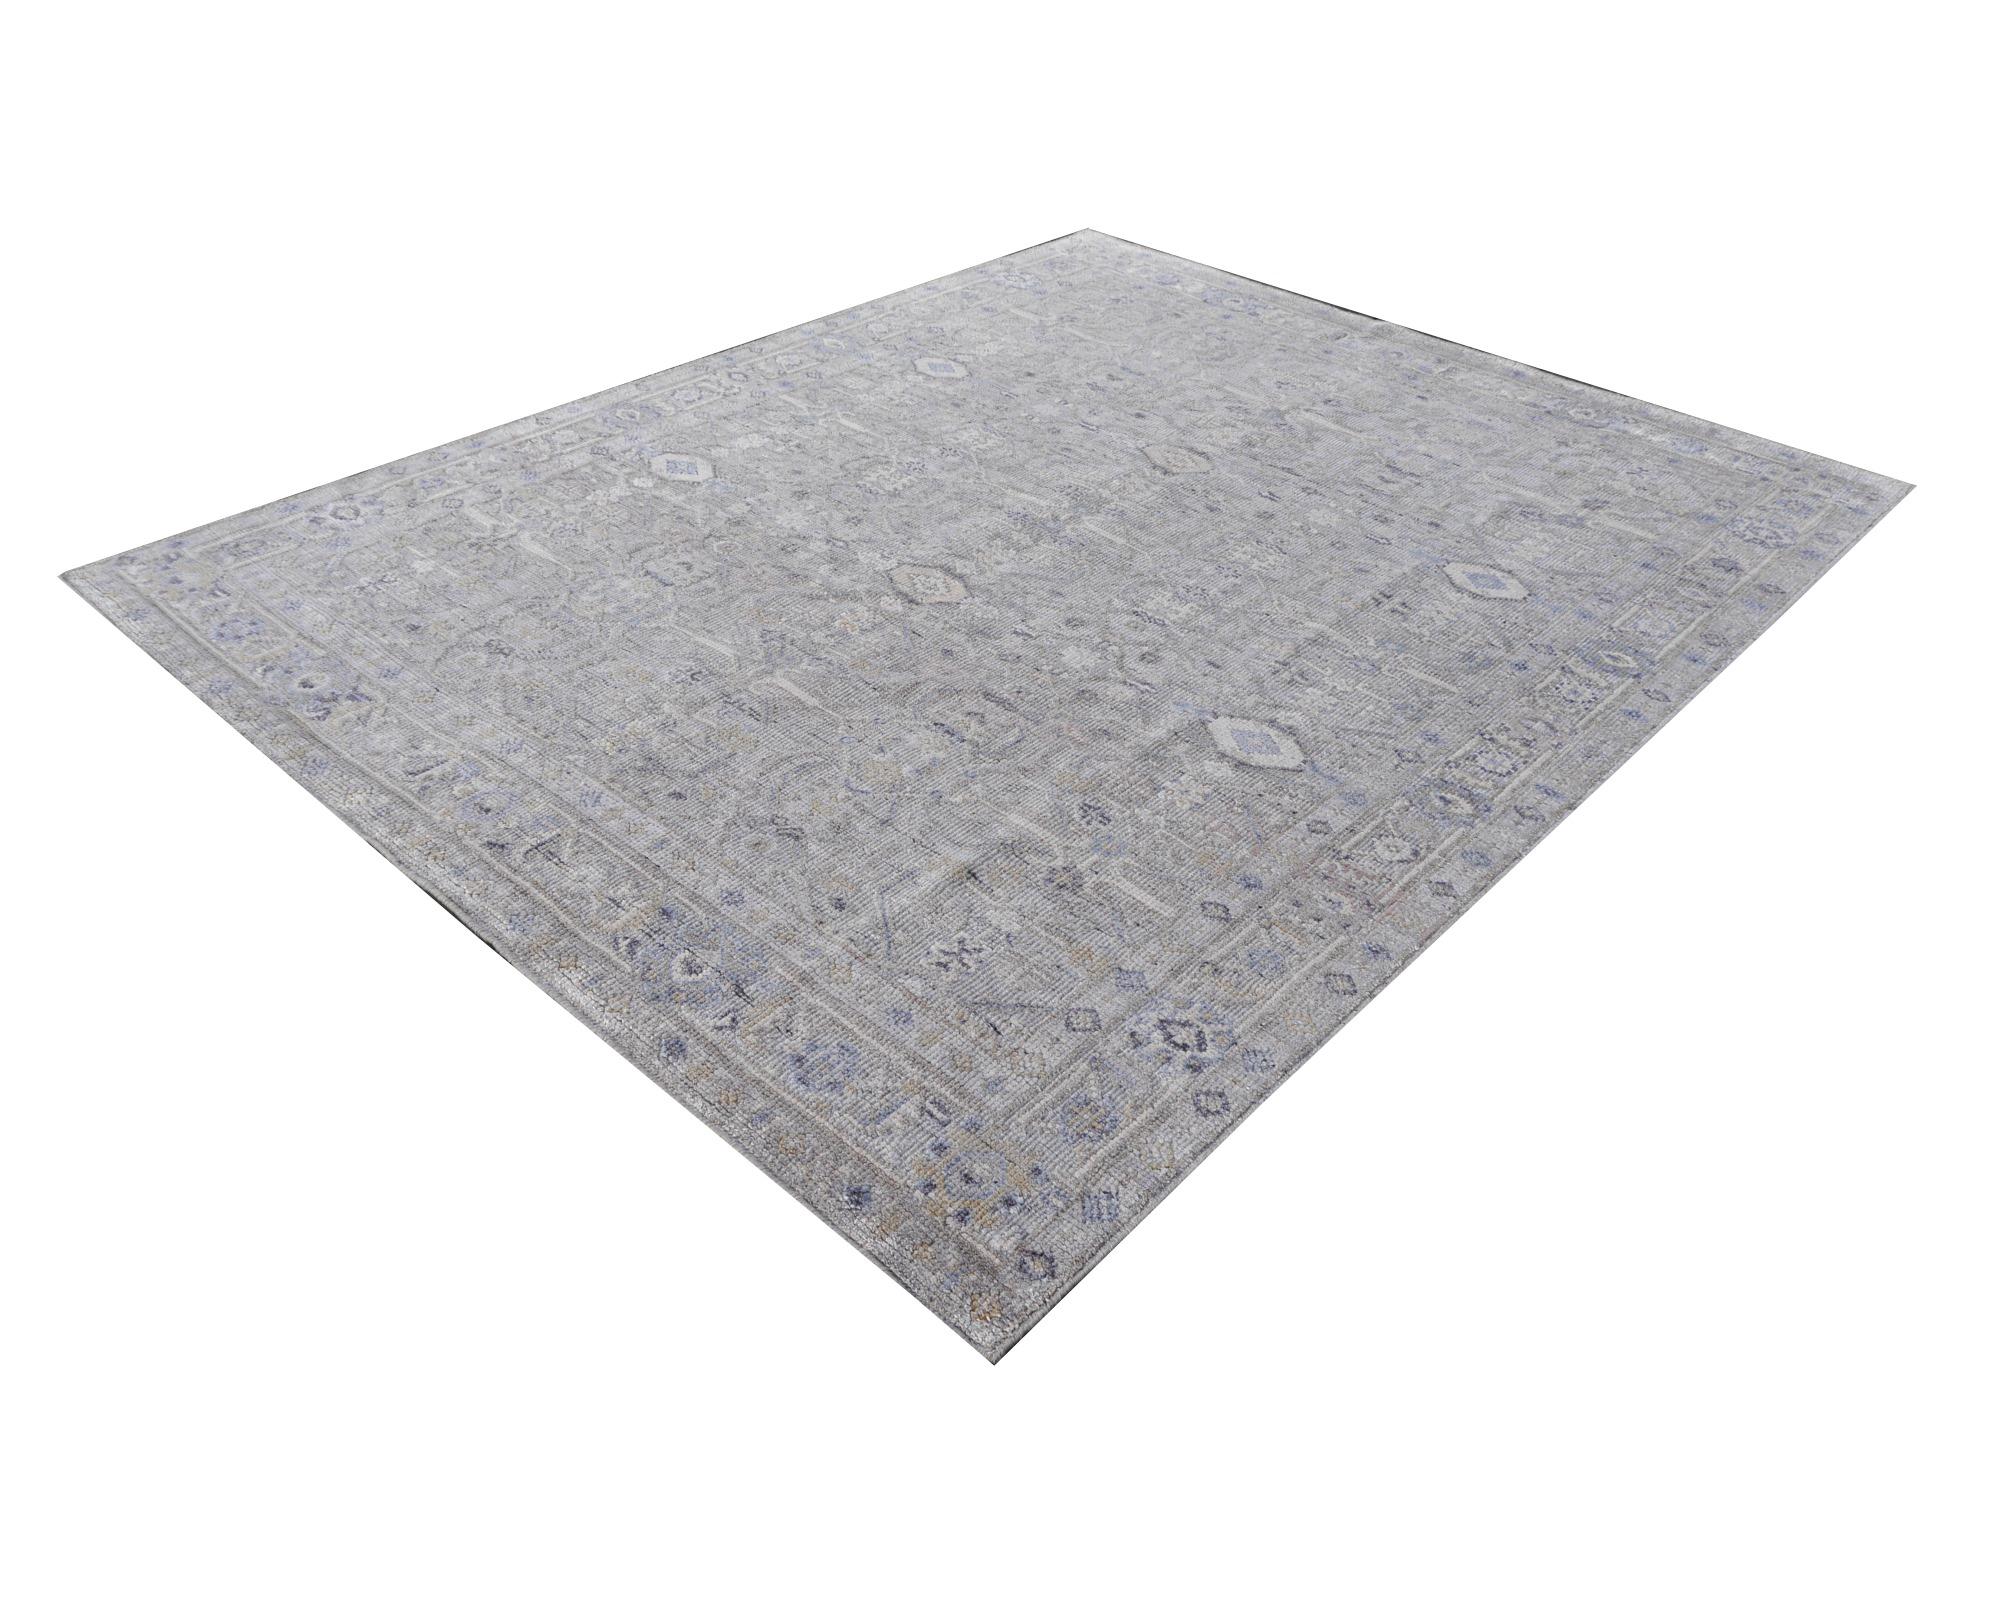 Hand-Knotted Modern Rug Wool Pile and Bamboo Silk in style of Oushak